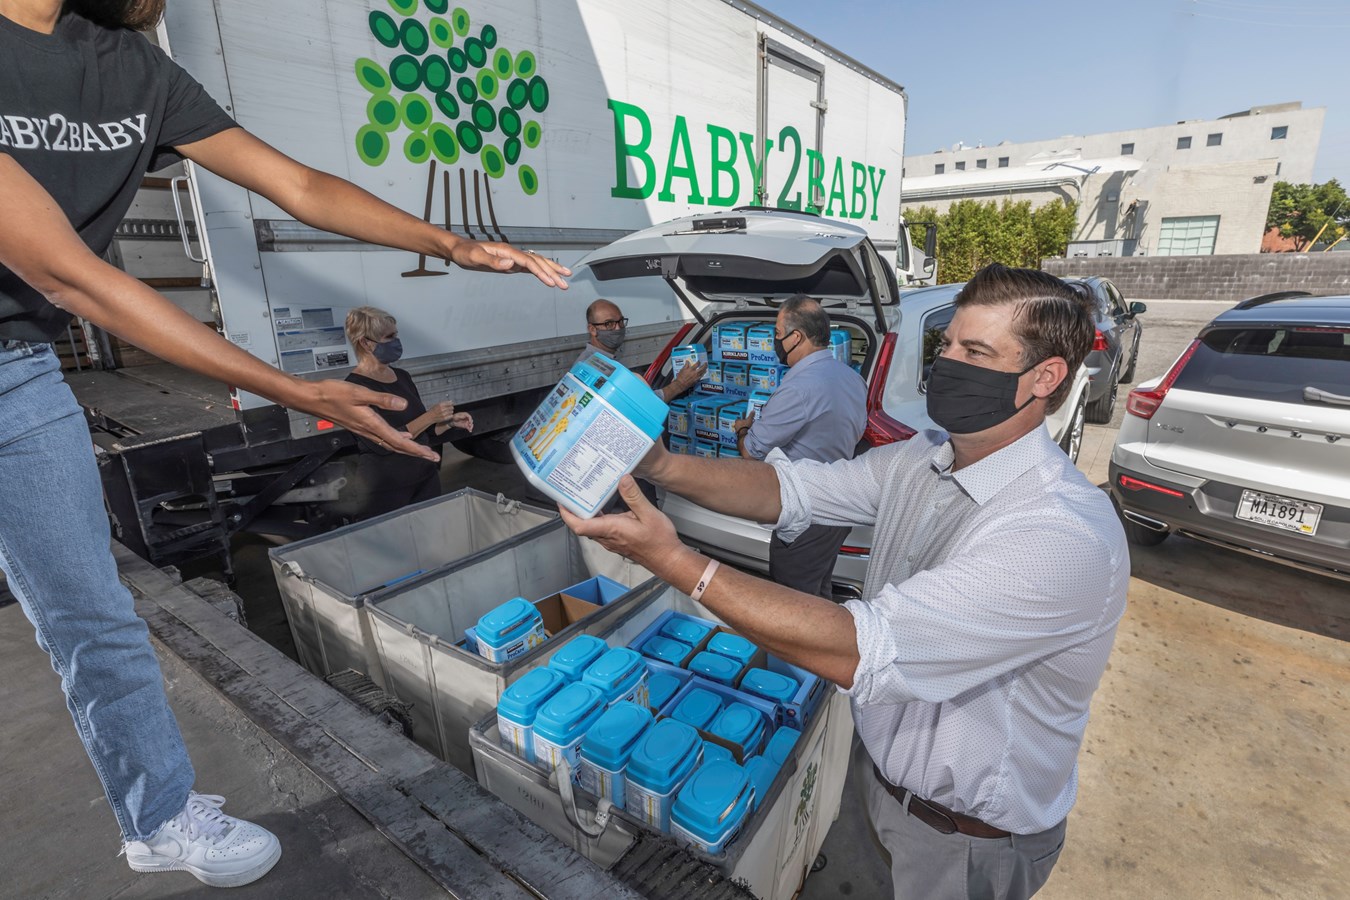 Southern California Volvo retailers donate nearly $50,000 to feed babies in need amidst COVID-19 and wildfires